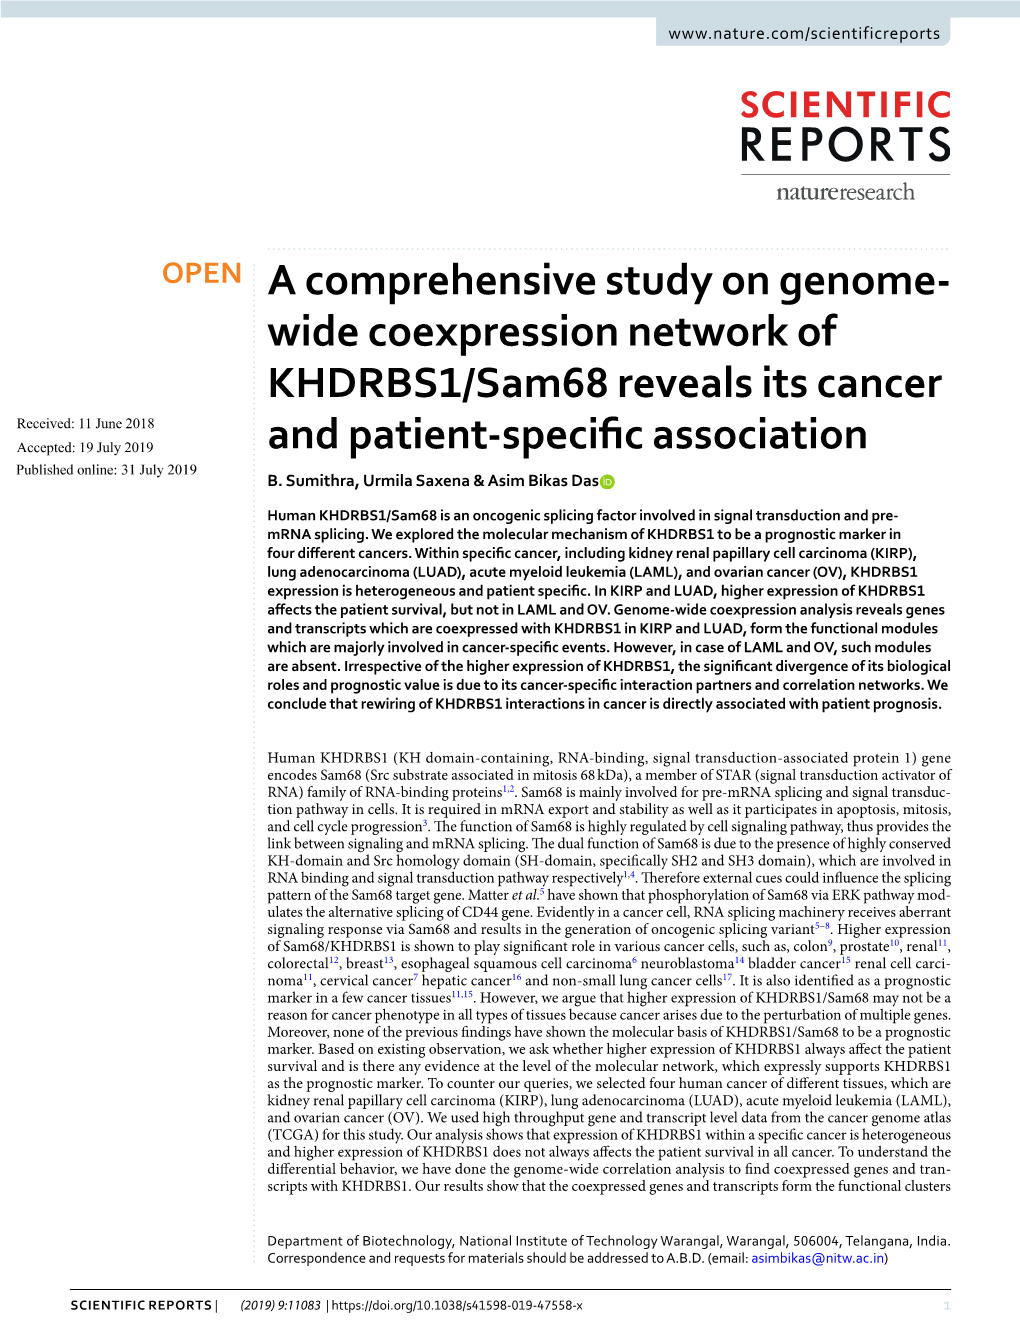 A Comprehensive Study on Genome-Wide Coexpression